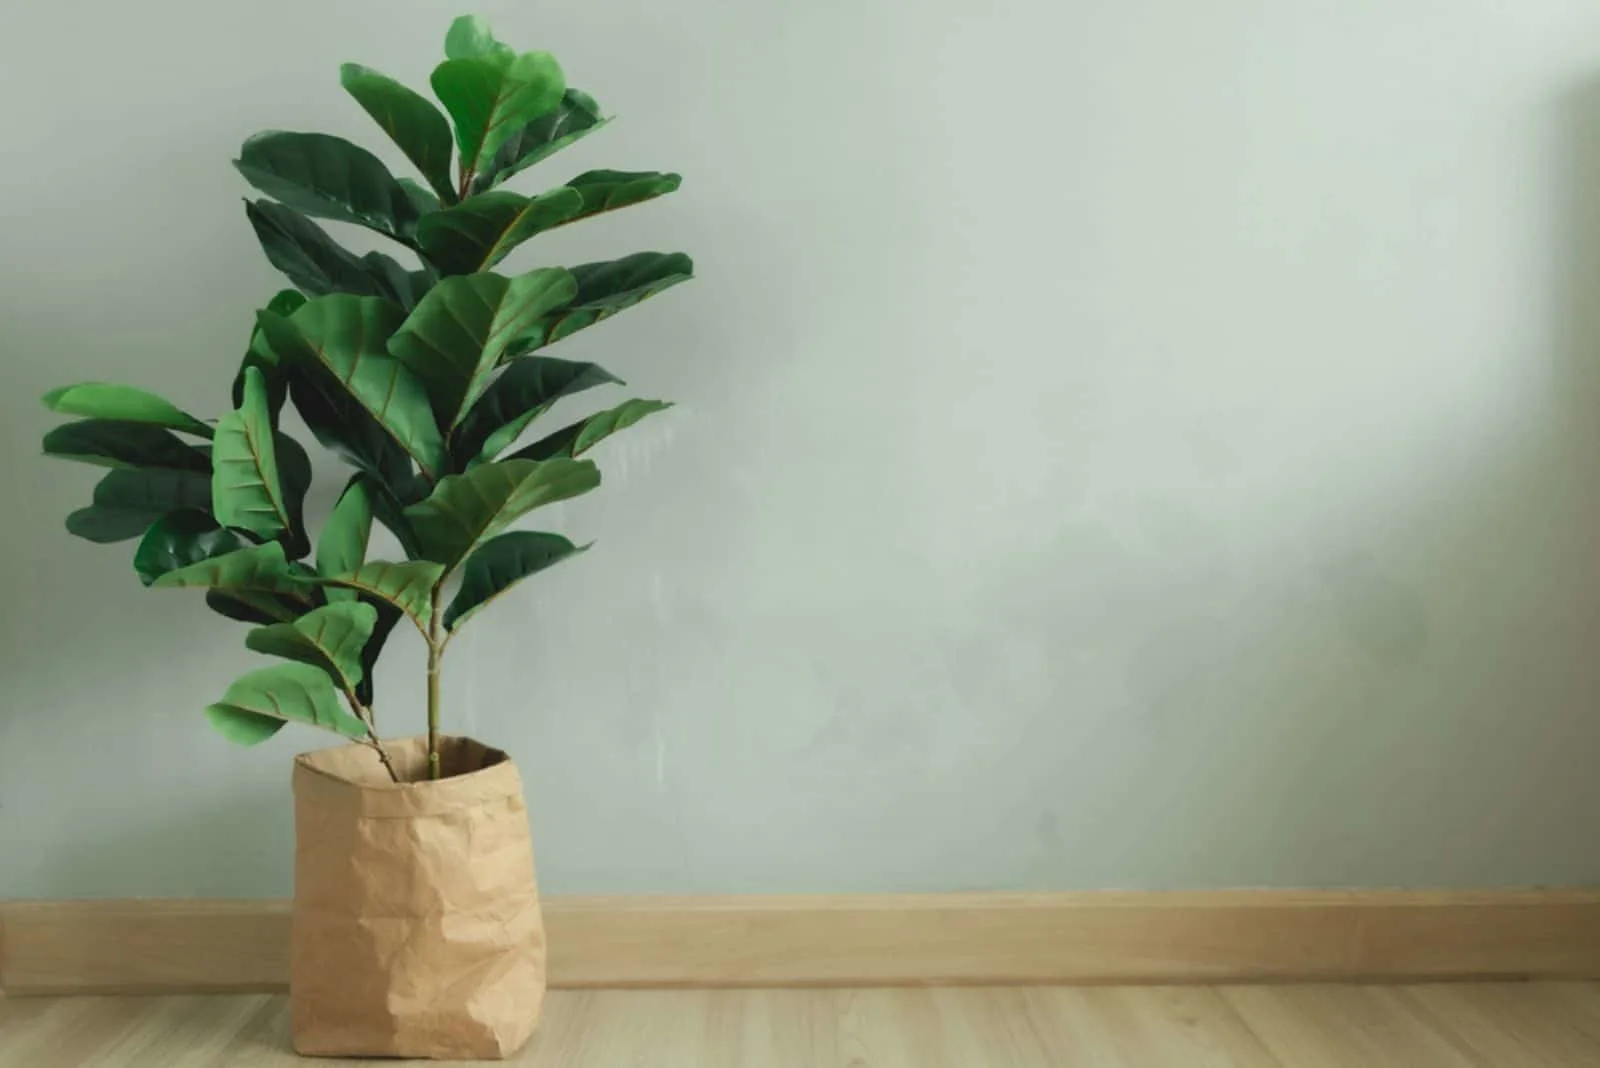 Fiddle Leaf Fig plant with paper pot stand in the room